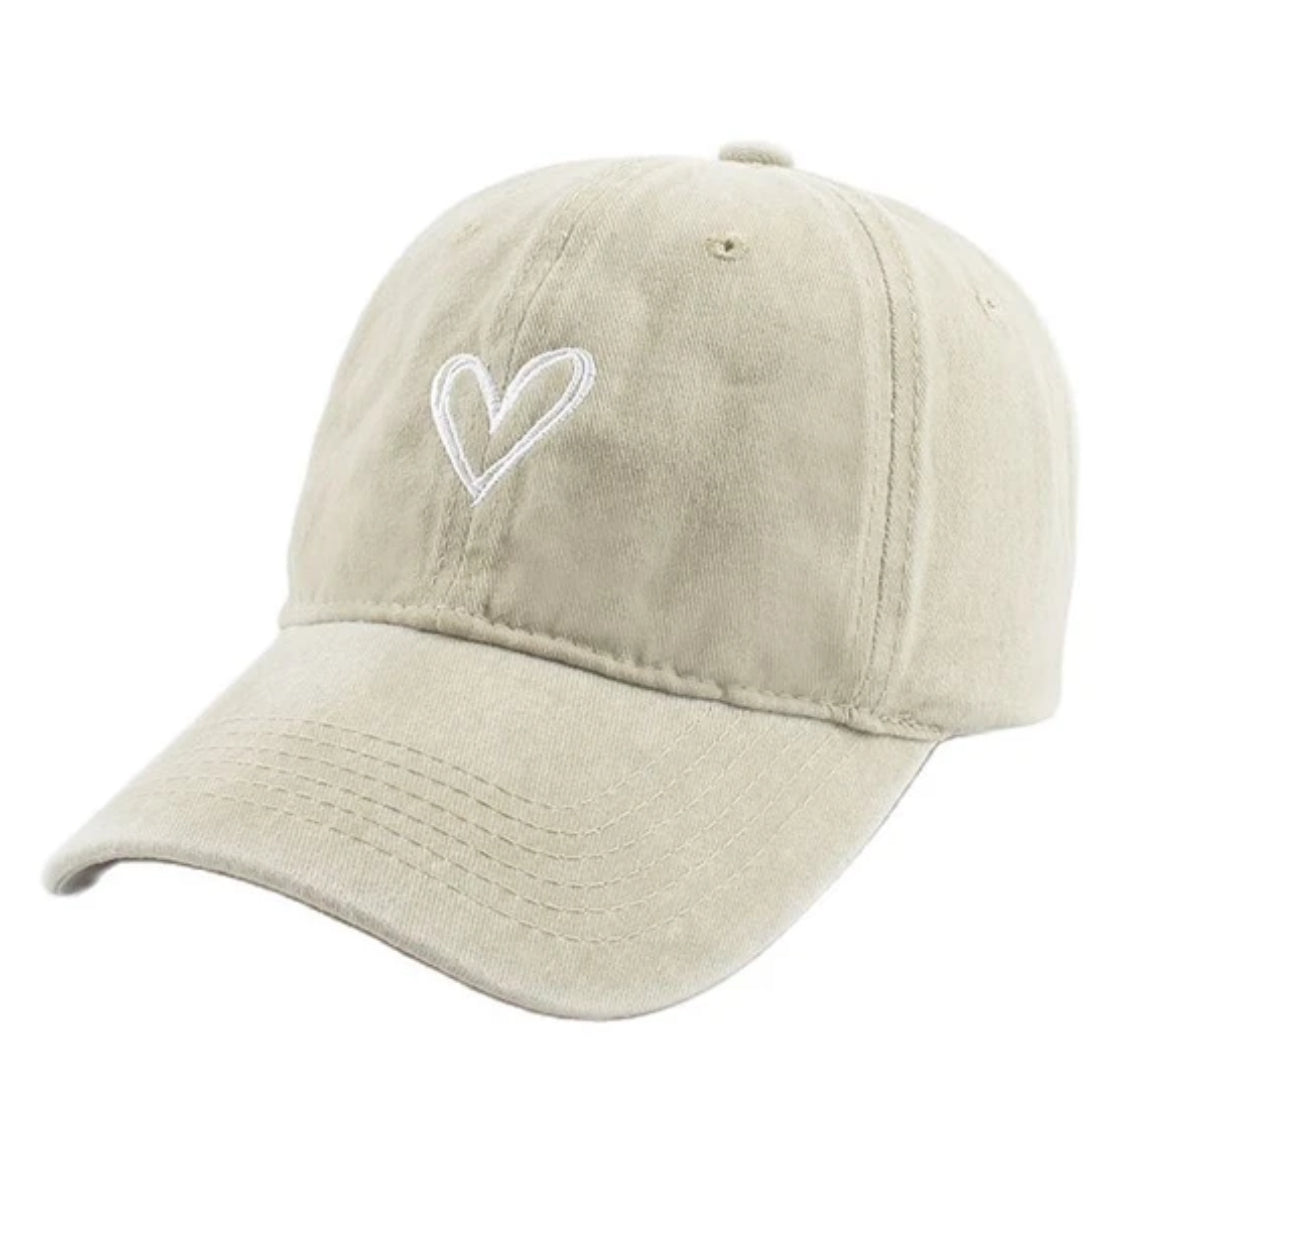 Fashion Outdoor Sport Baseball Caps For Men Women Love Heart Embroidery Snapback Cap Washed Cotton